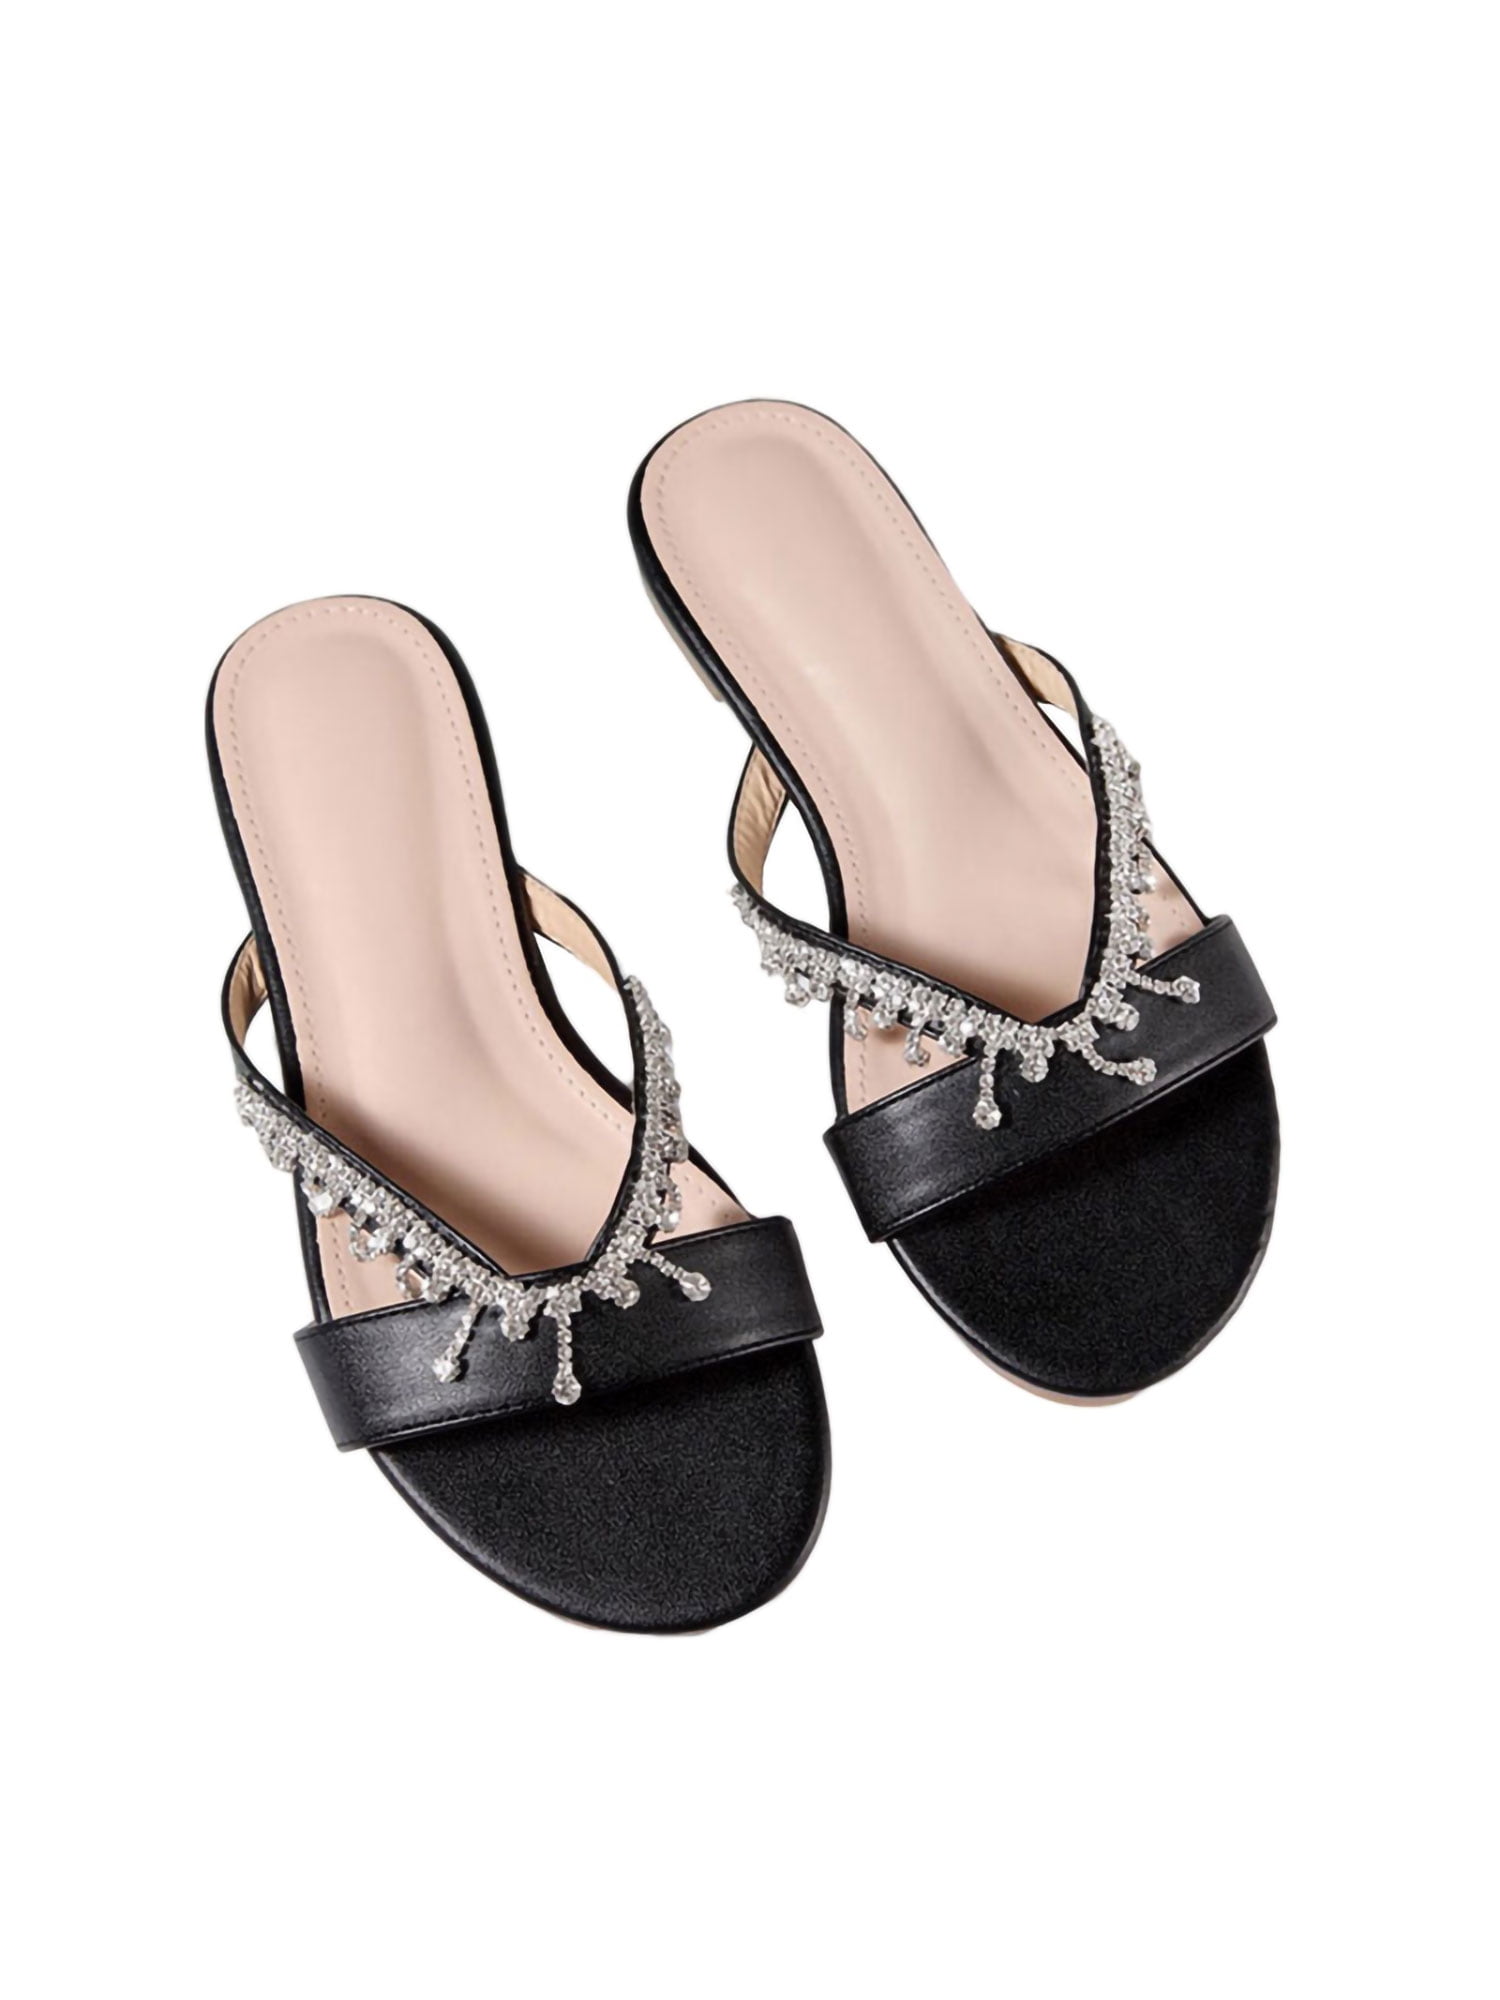 Womens Slip On Strappy Summer Holiday Sandal with Diamante Floral Design